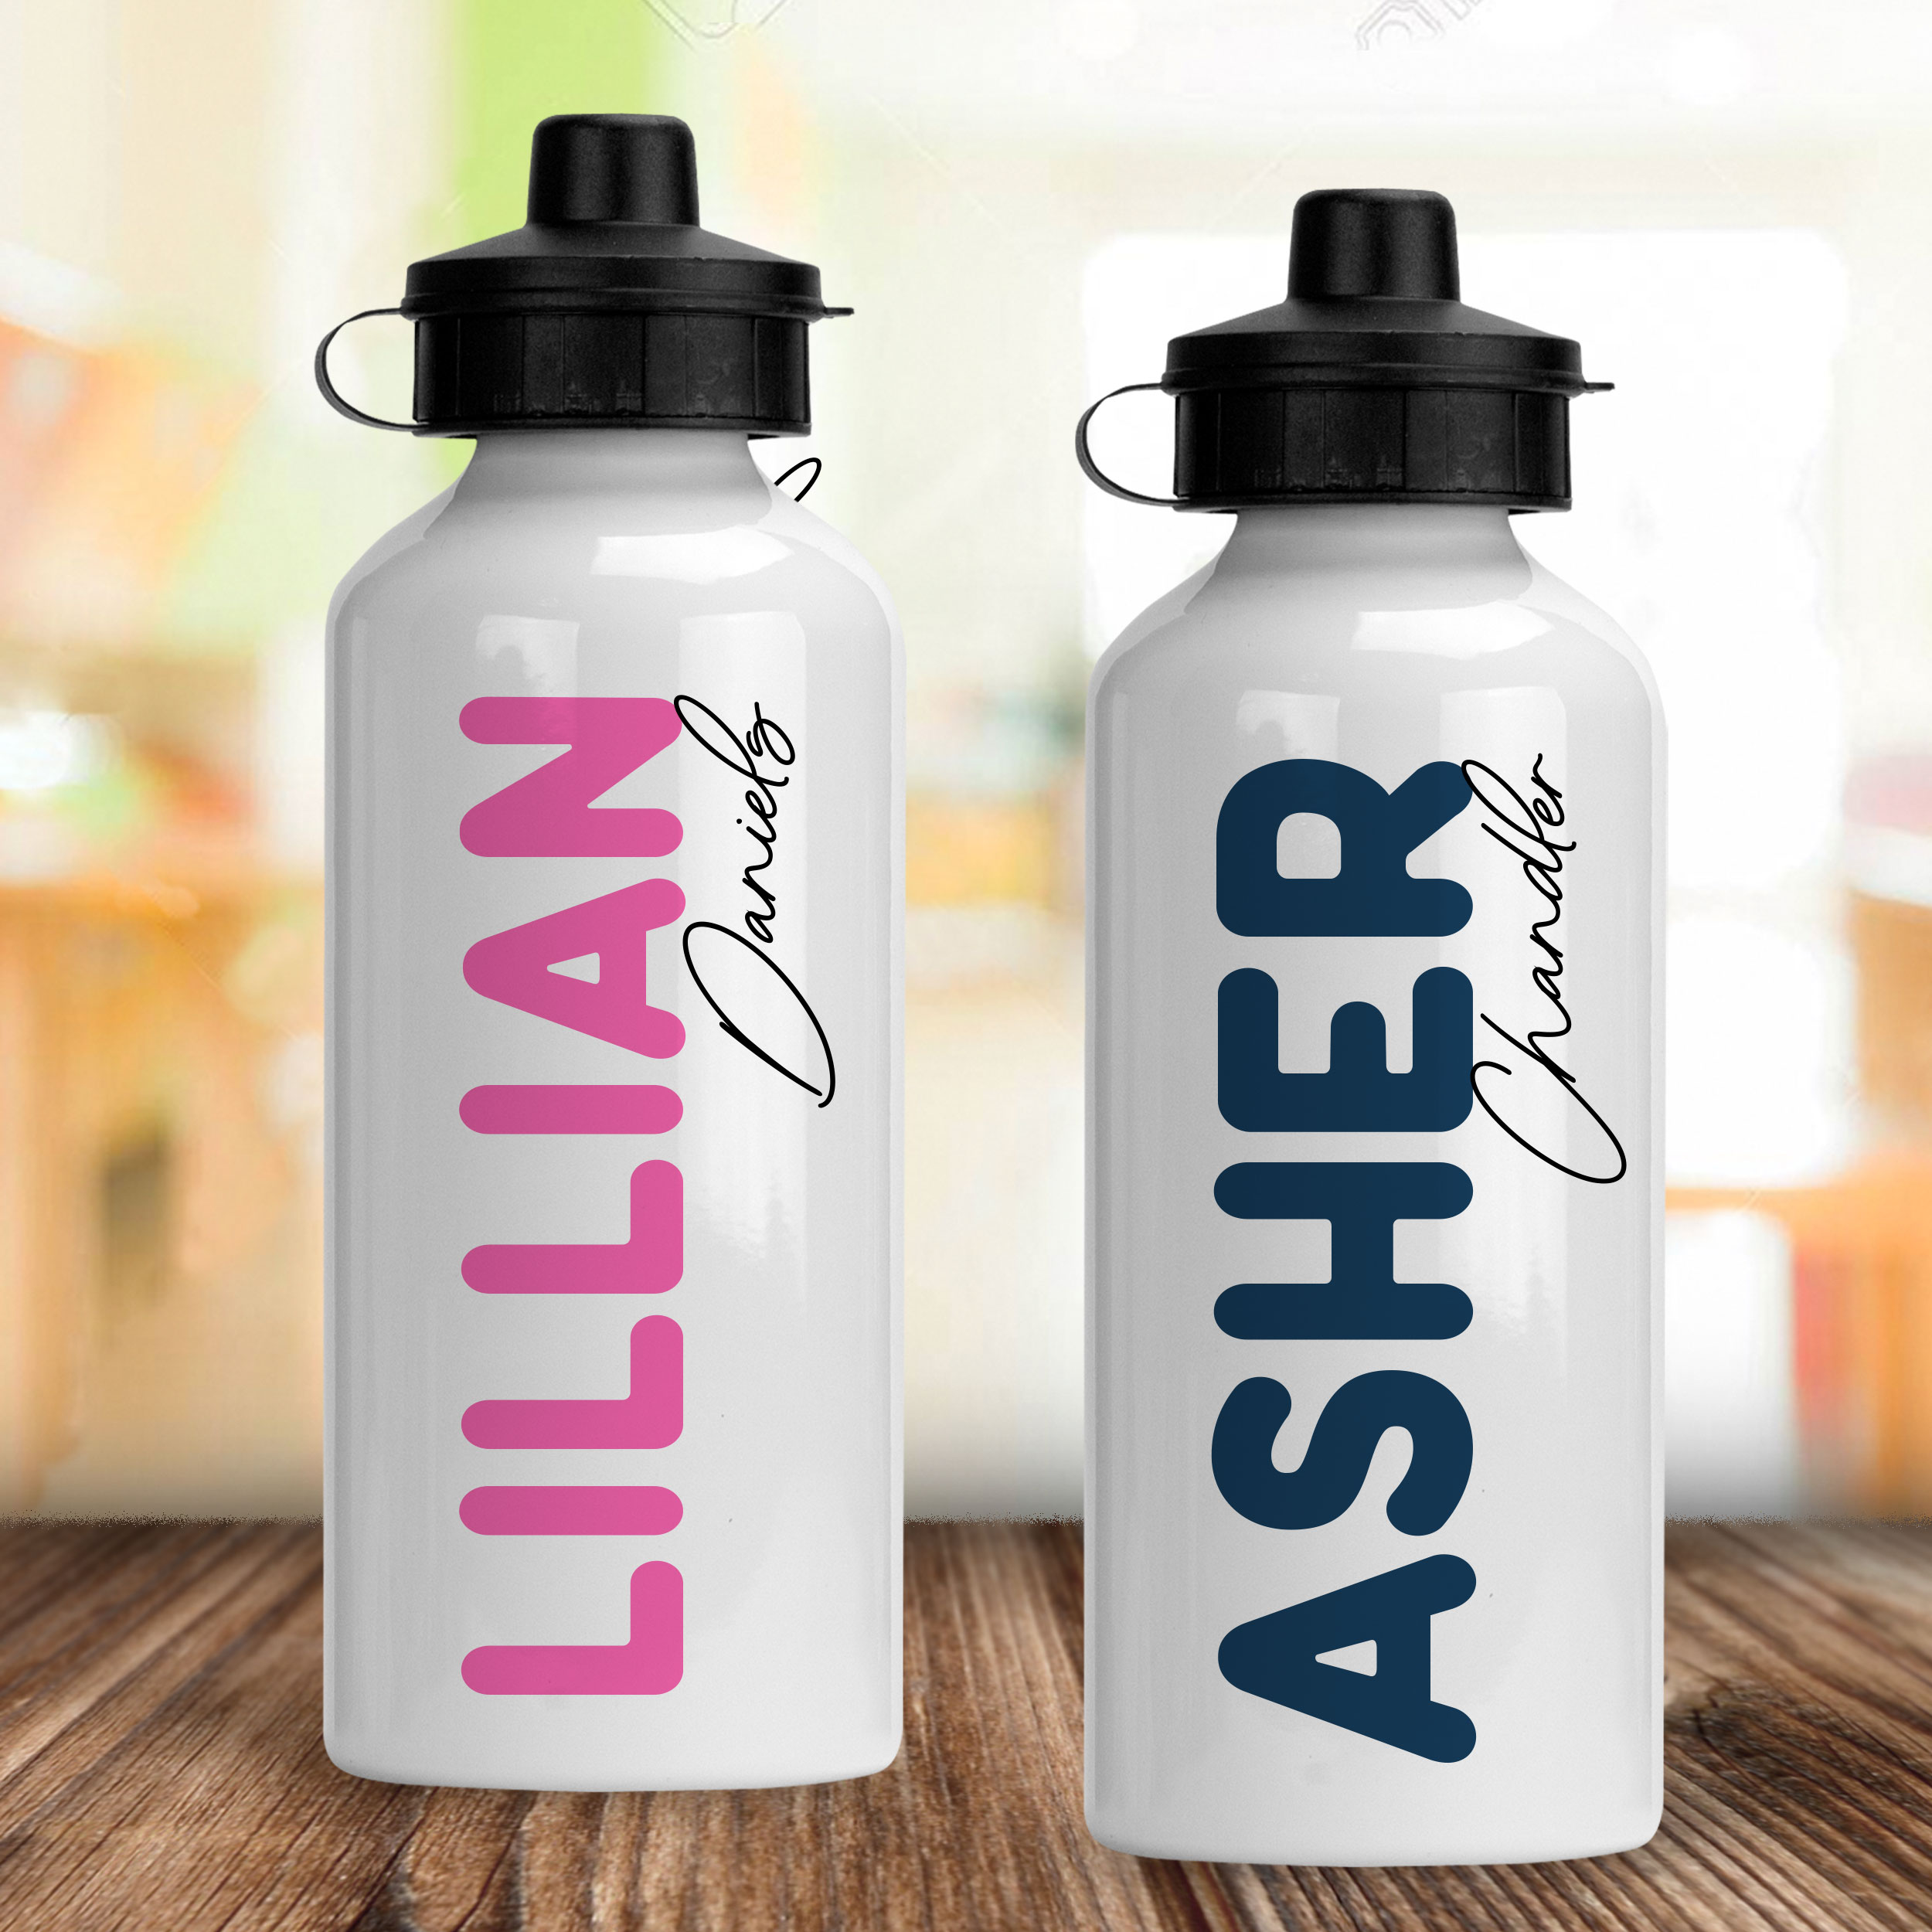 https://cdn11.bigcommerce.com/s-5grzuu6/images/stencil/original/products/6241/49075/Mod-Boho-Personalized_Water-Bottles_for_Kids__13799.1659722997.jpg?c=2